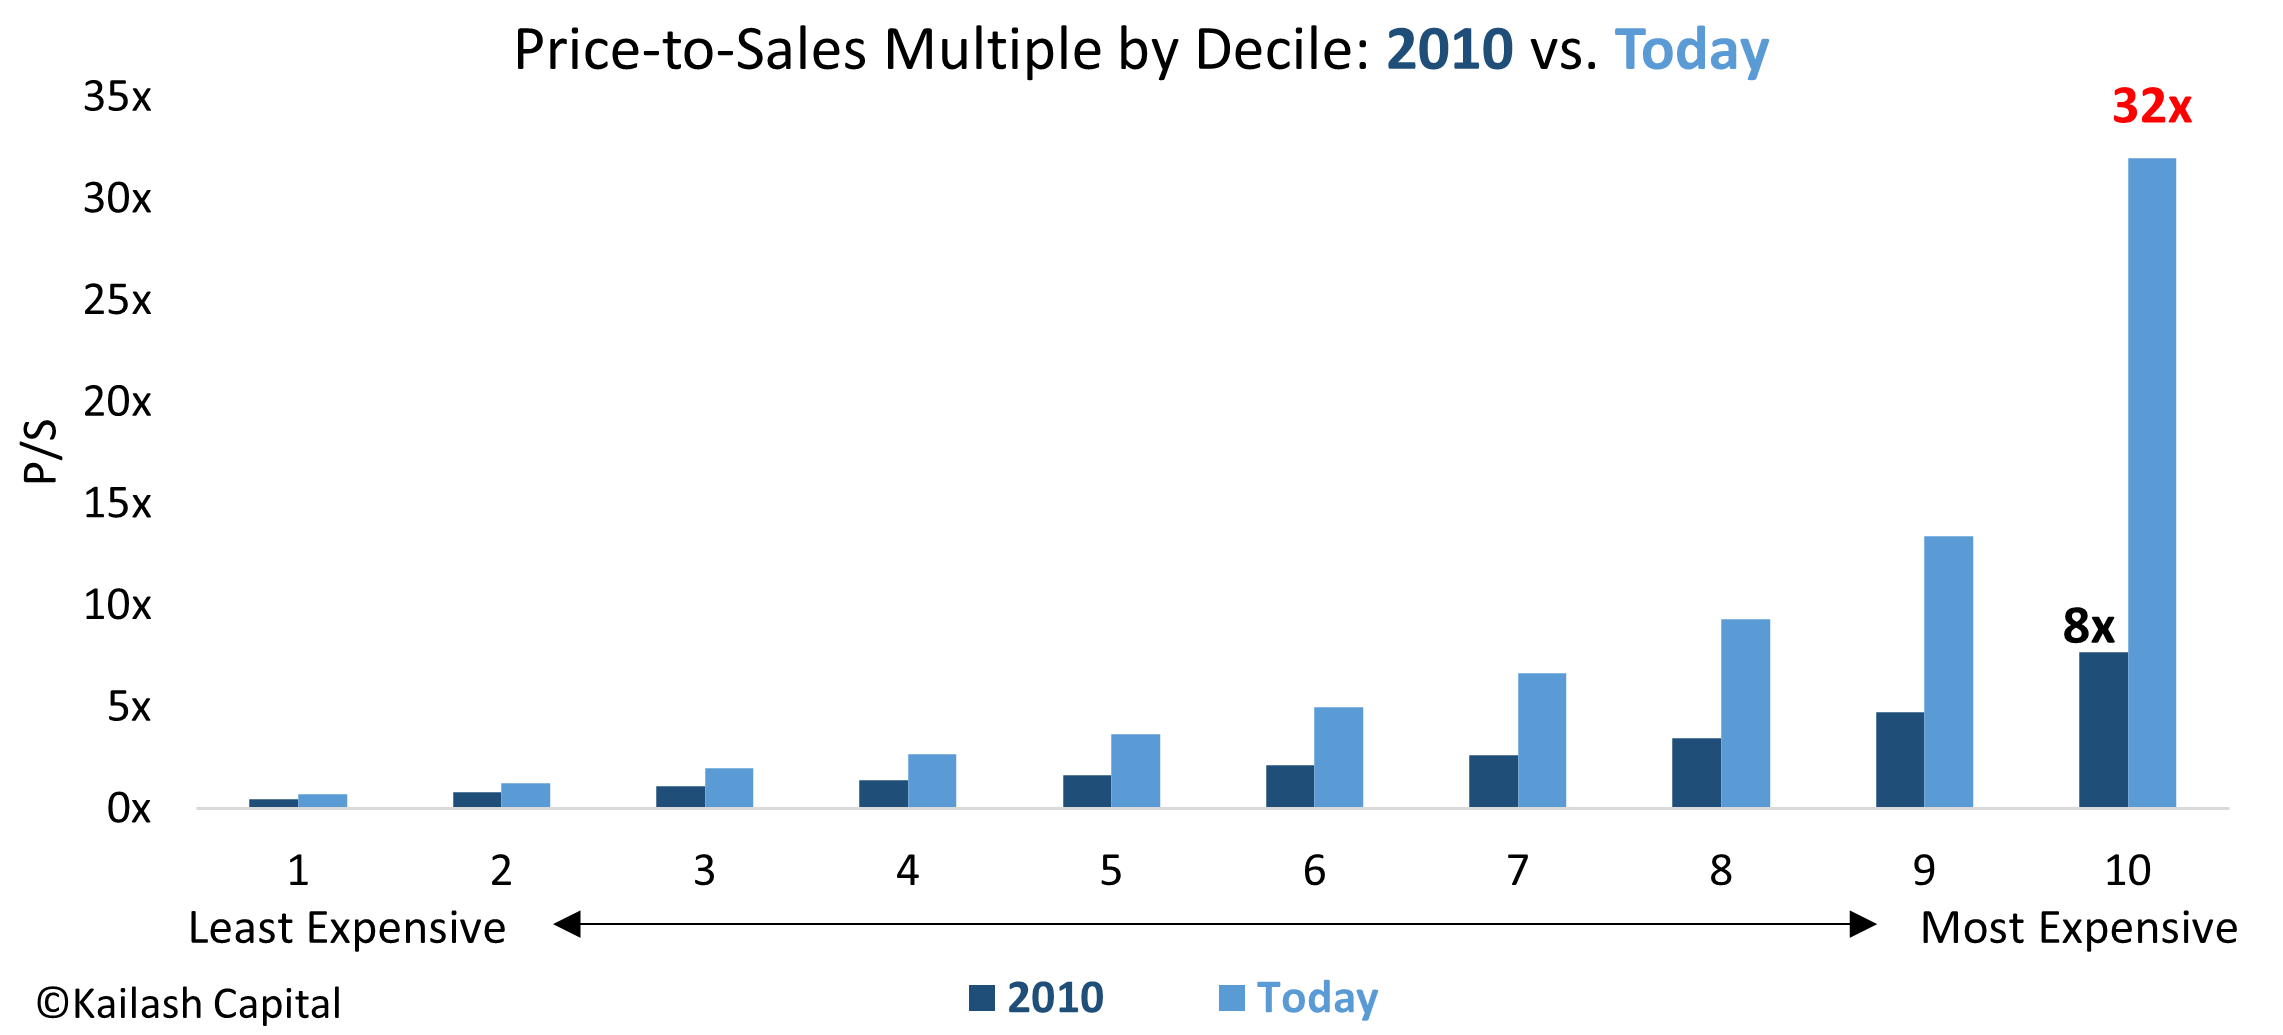 Price to Sales Multiple by Decile 2010 vs Today